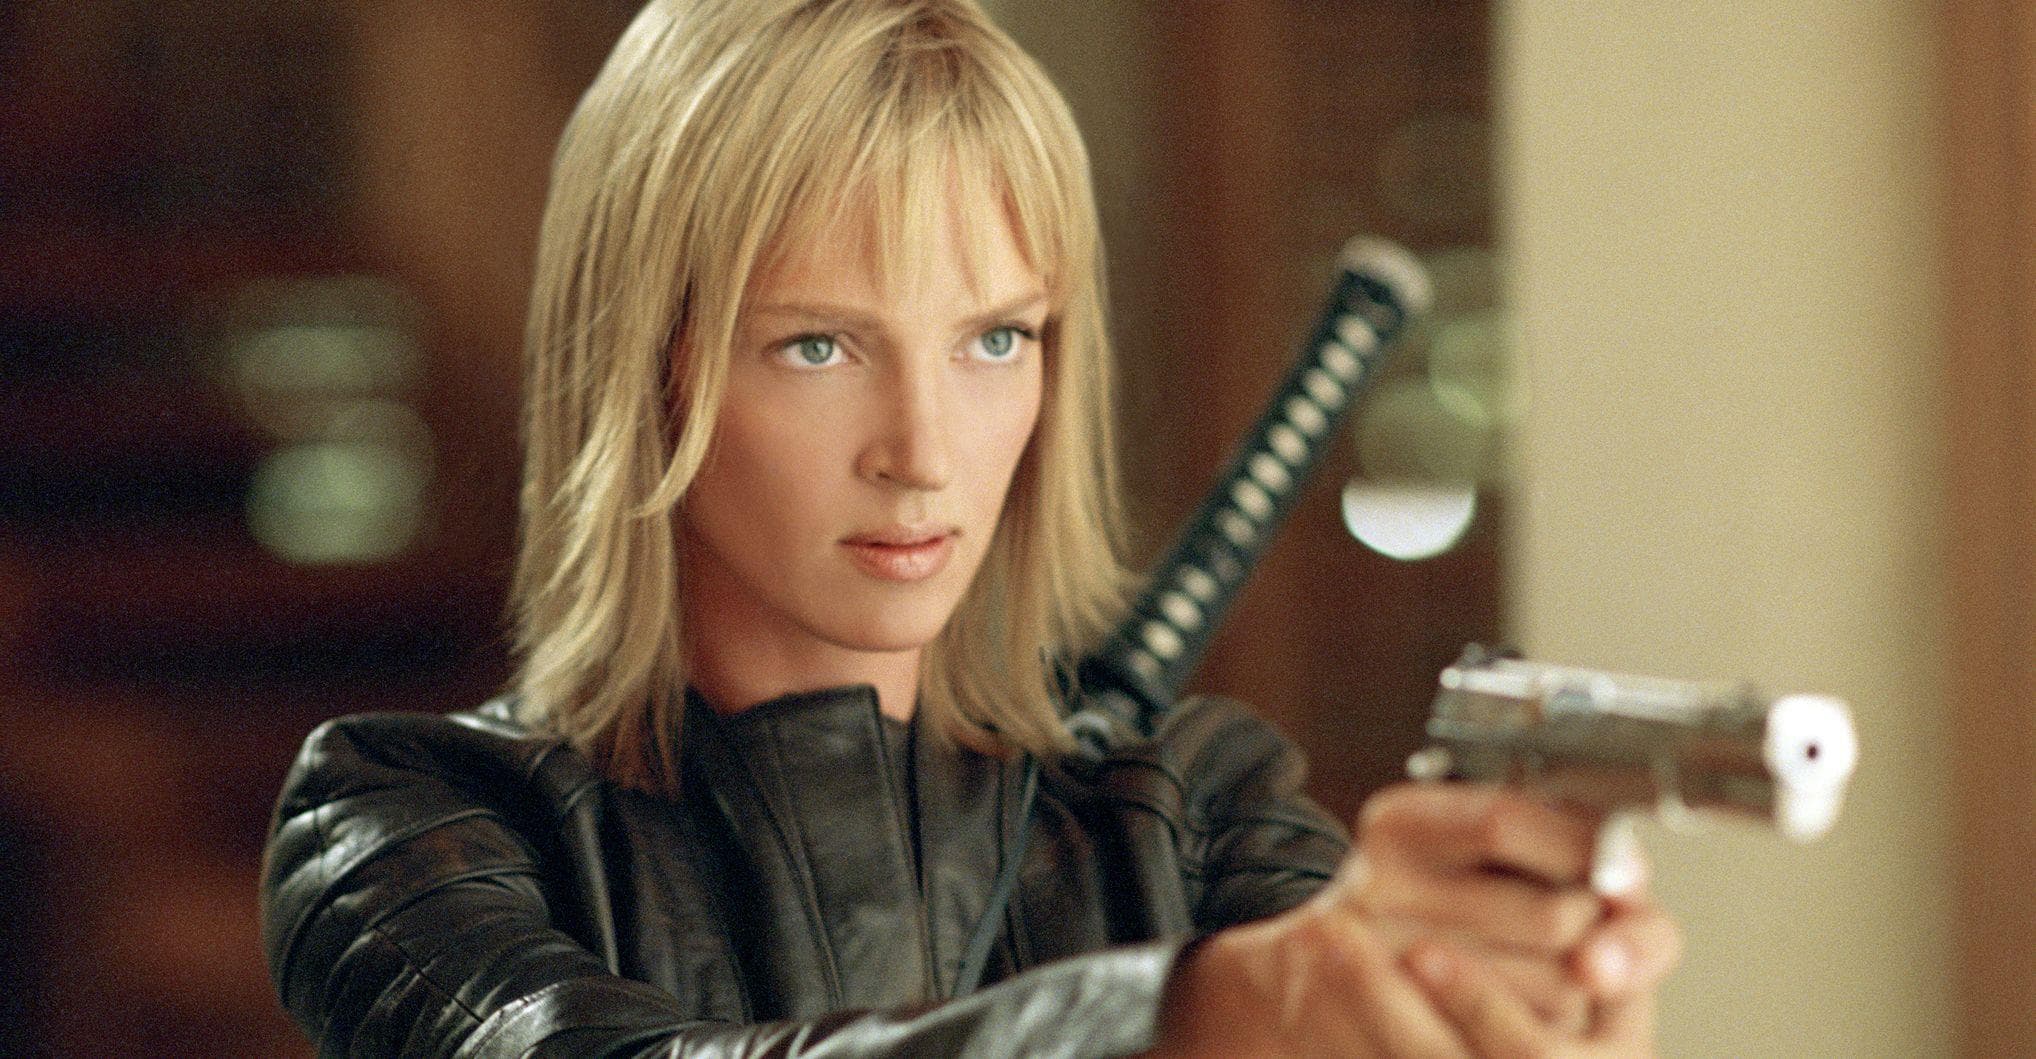 The Top 90+ Action Movies With Female Leads, Ranked By Fans